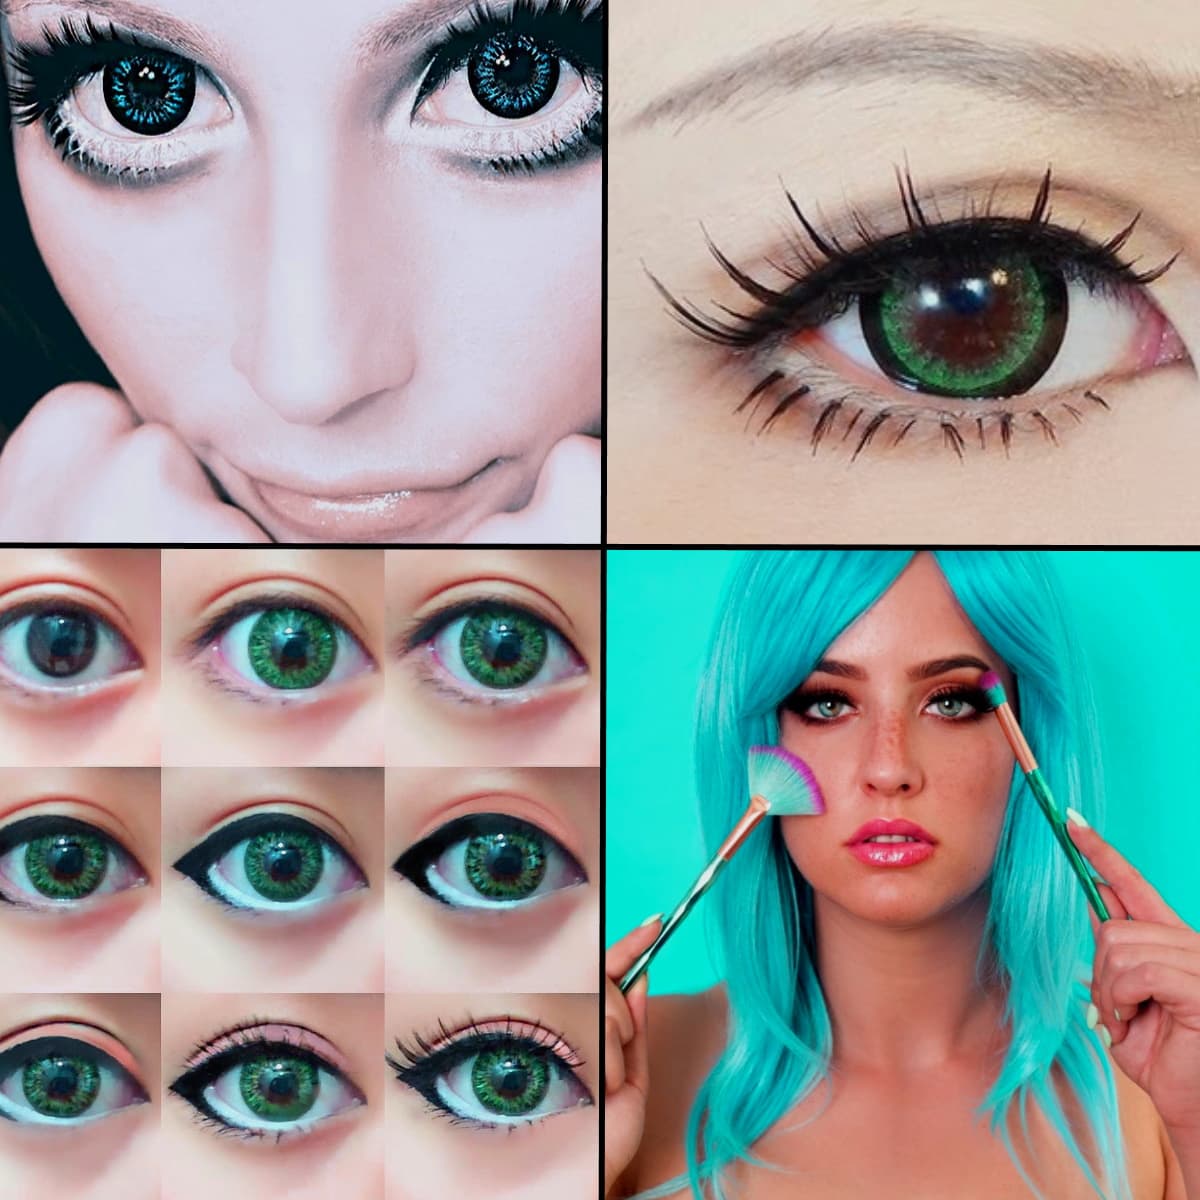 Simple Make-up tricks to get huge Anime Cartoon eyes | Now thats Peachy